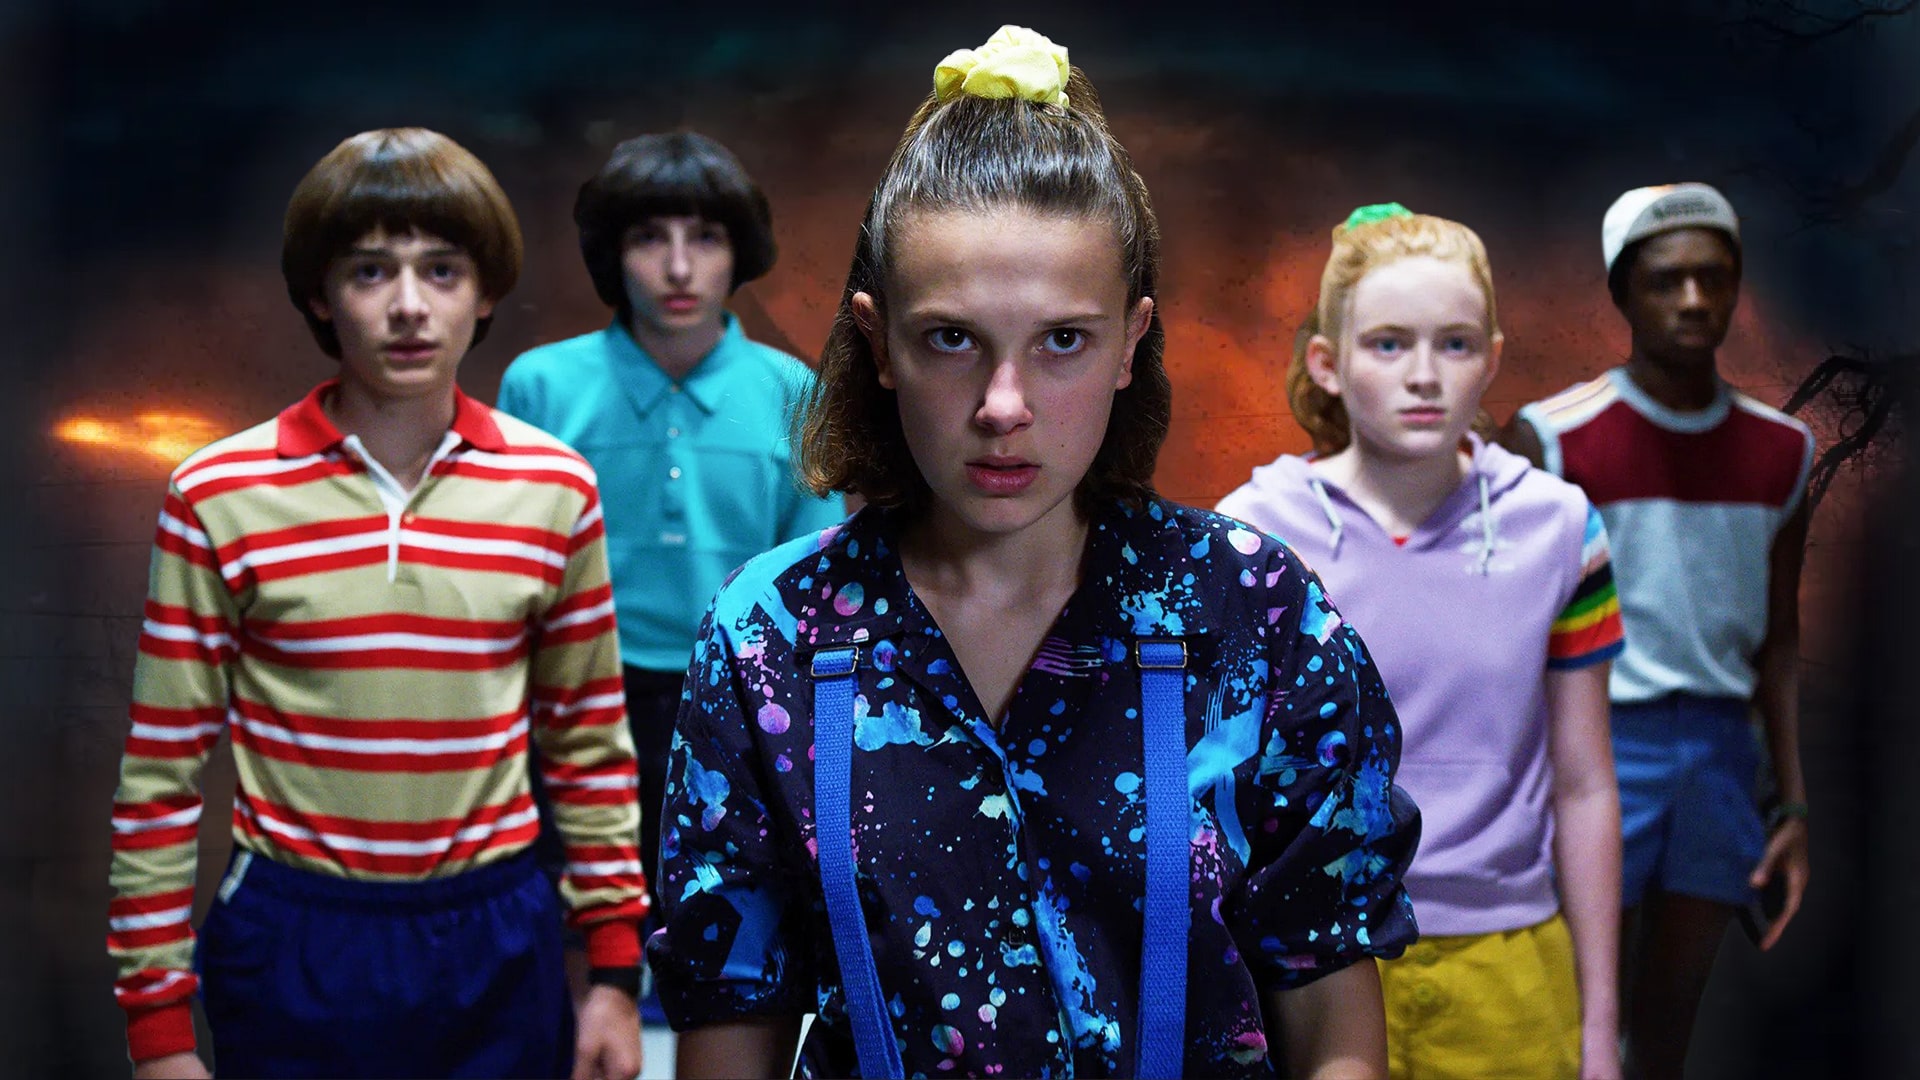 100 Stranger Things Facts You Haven’t Read Before - Stranger Things Facts